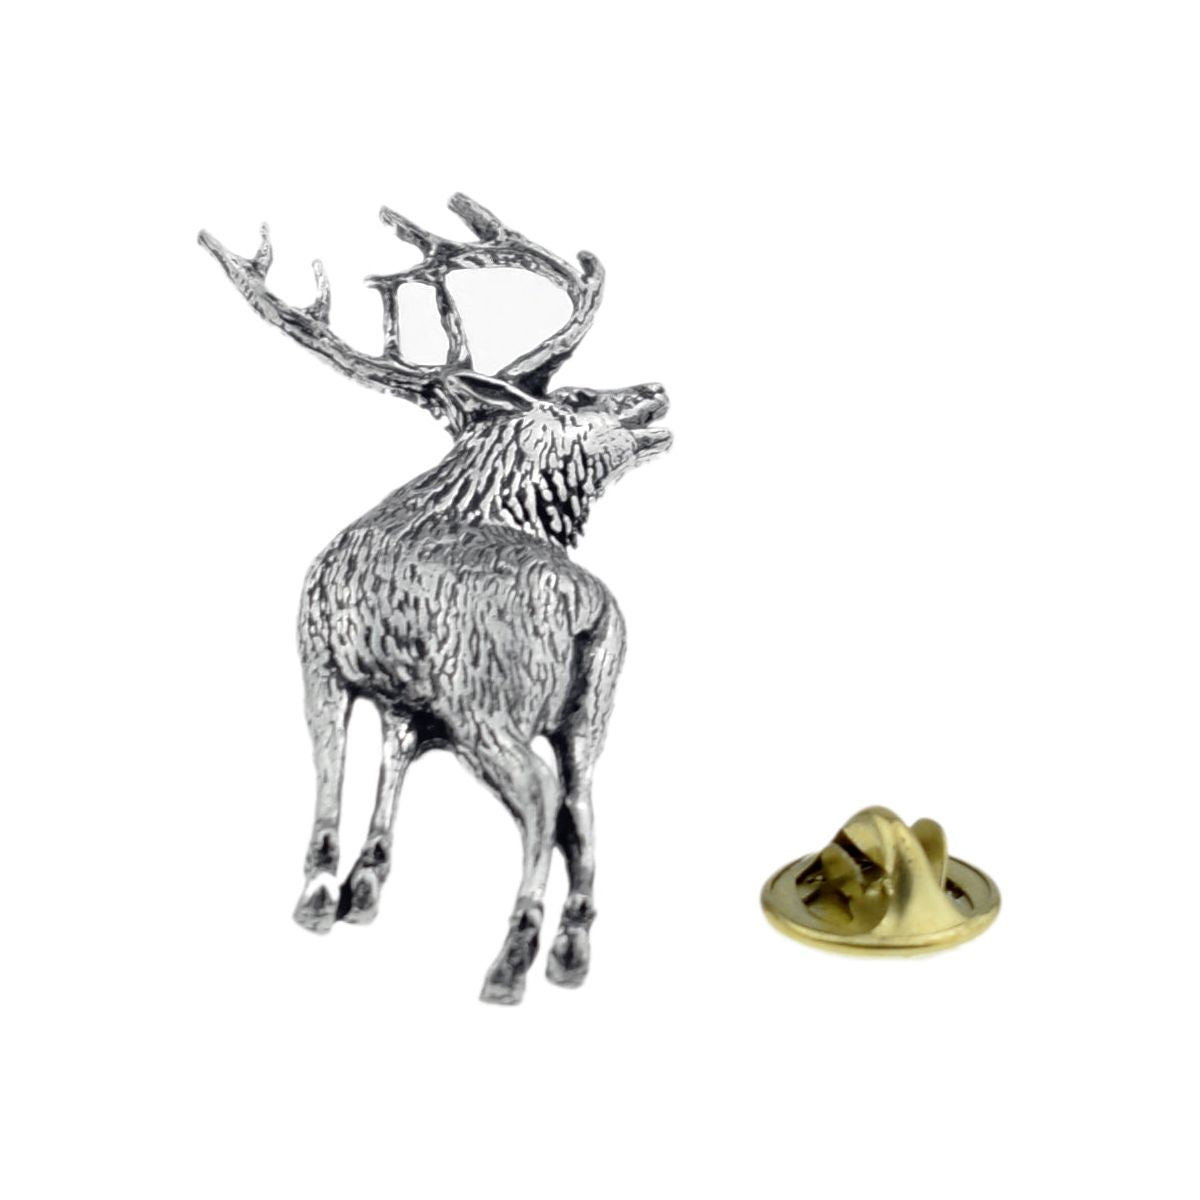 Stag English Pewter Lapel Pin Badge - Ashton and Finch